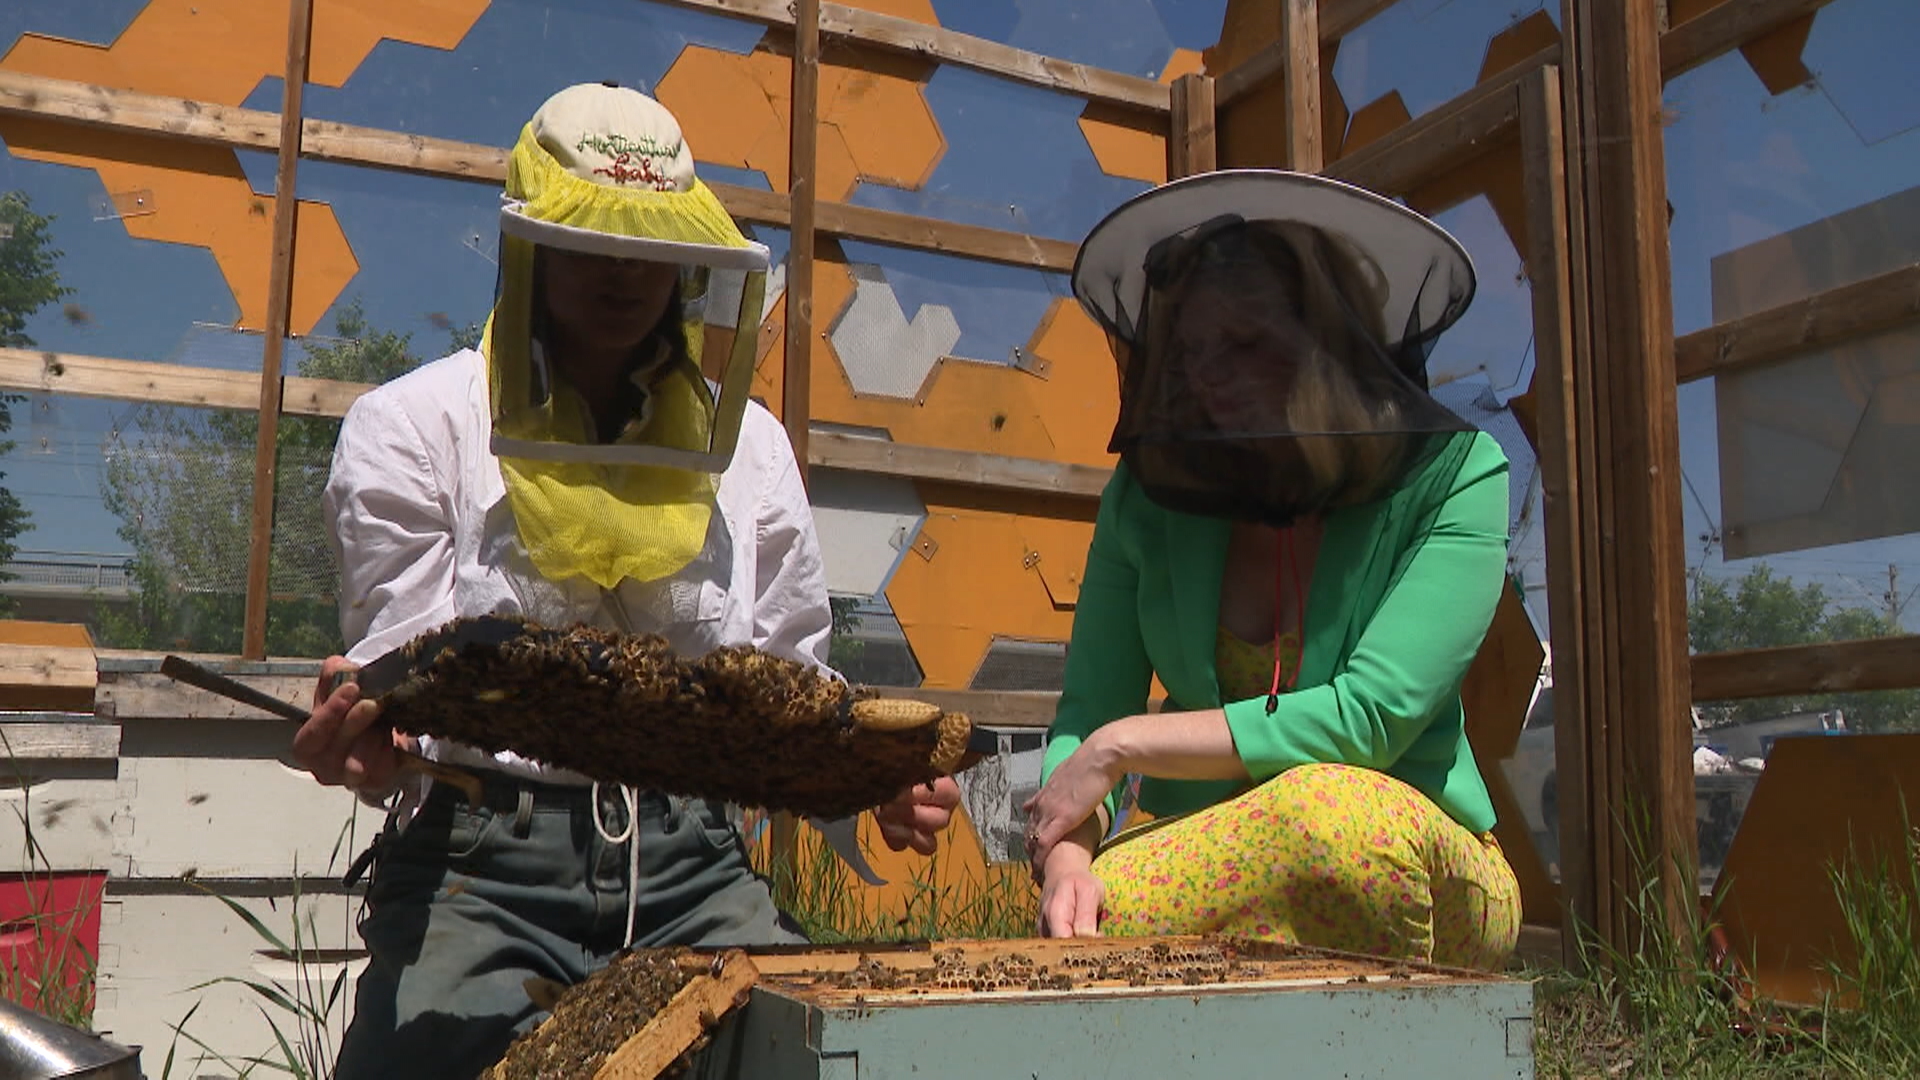 Free Calgary tour offers insight into the magical world of honey bees